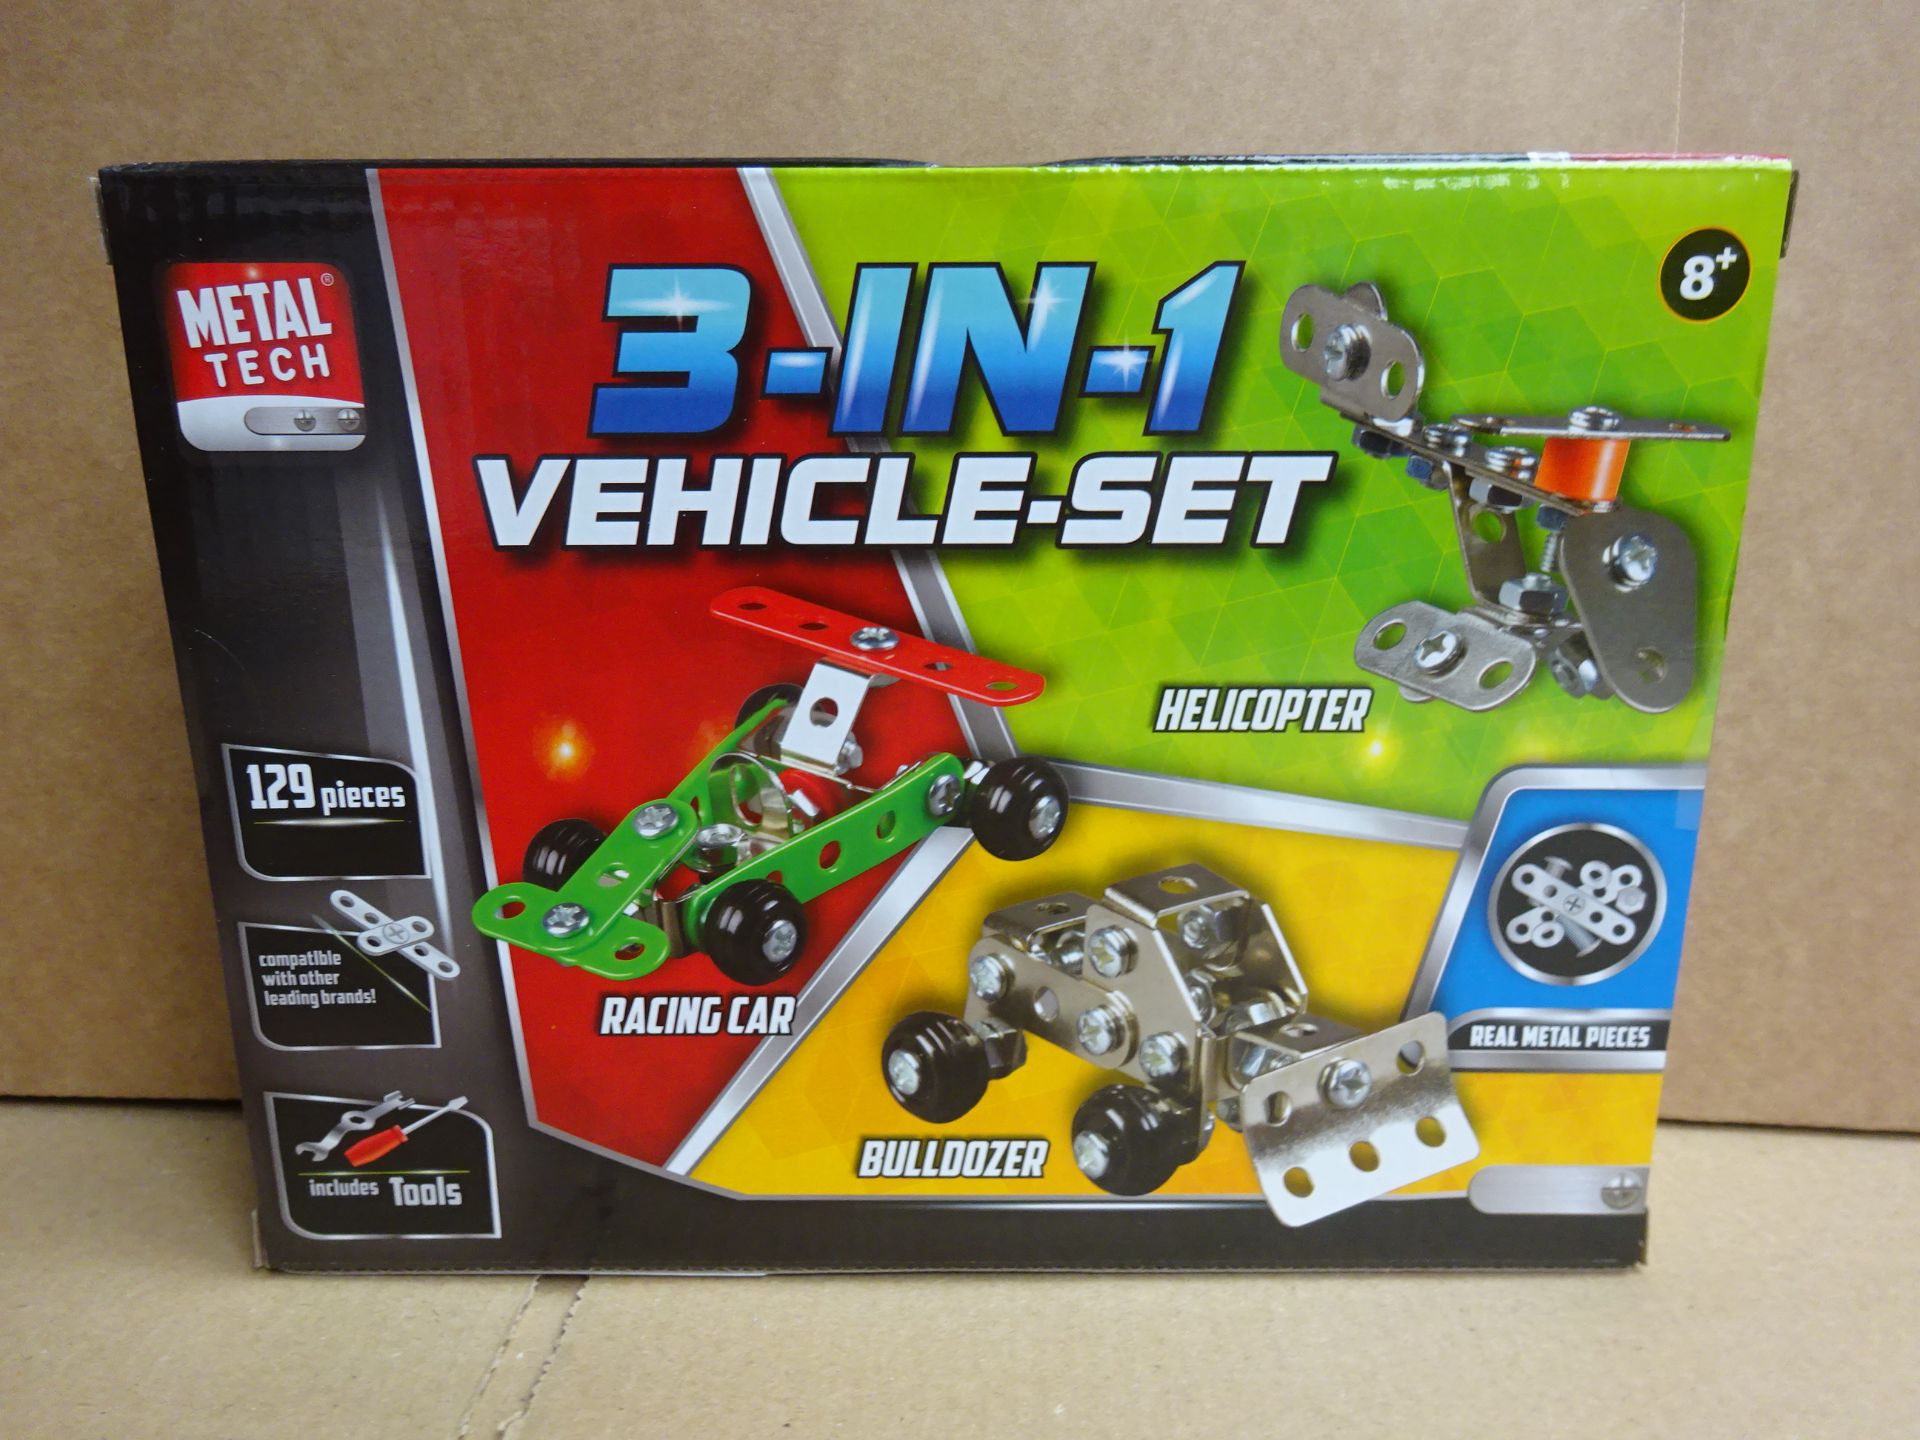 METAL TECH 3 IN 1 VEHICLE SET, HELICOPTER, RACING CAR & BULLDOZER